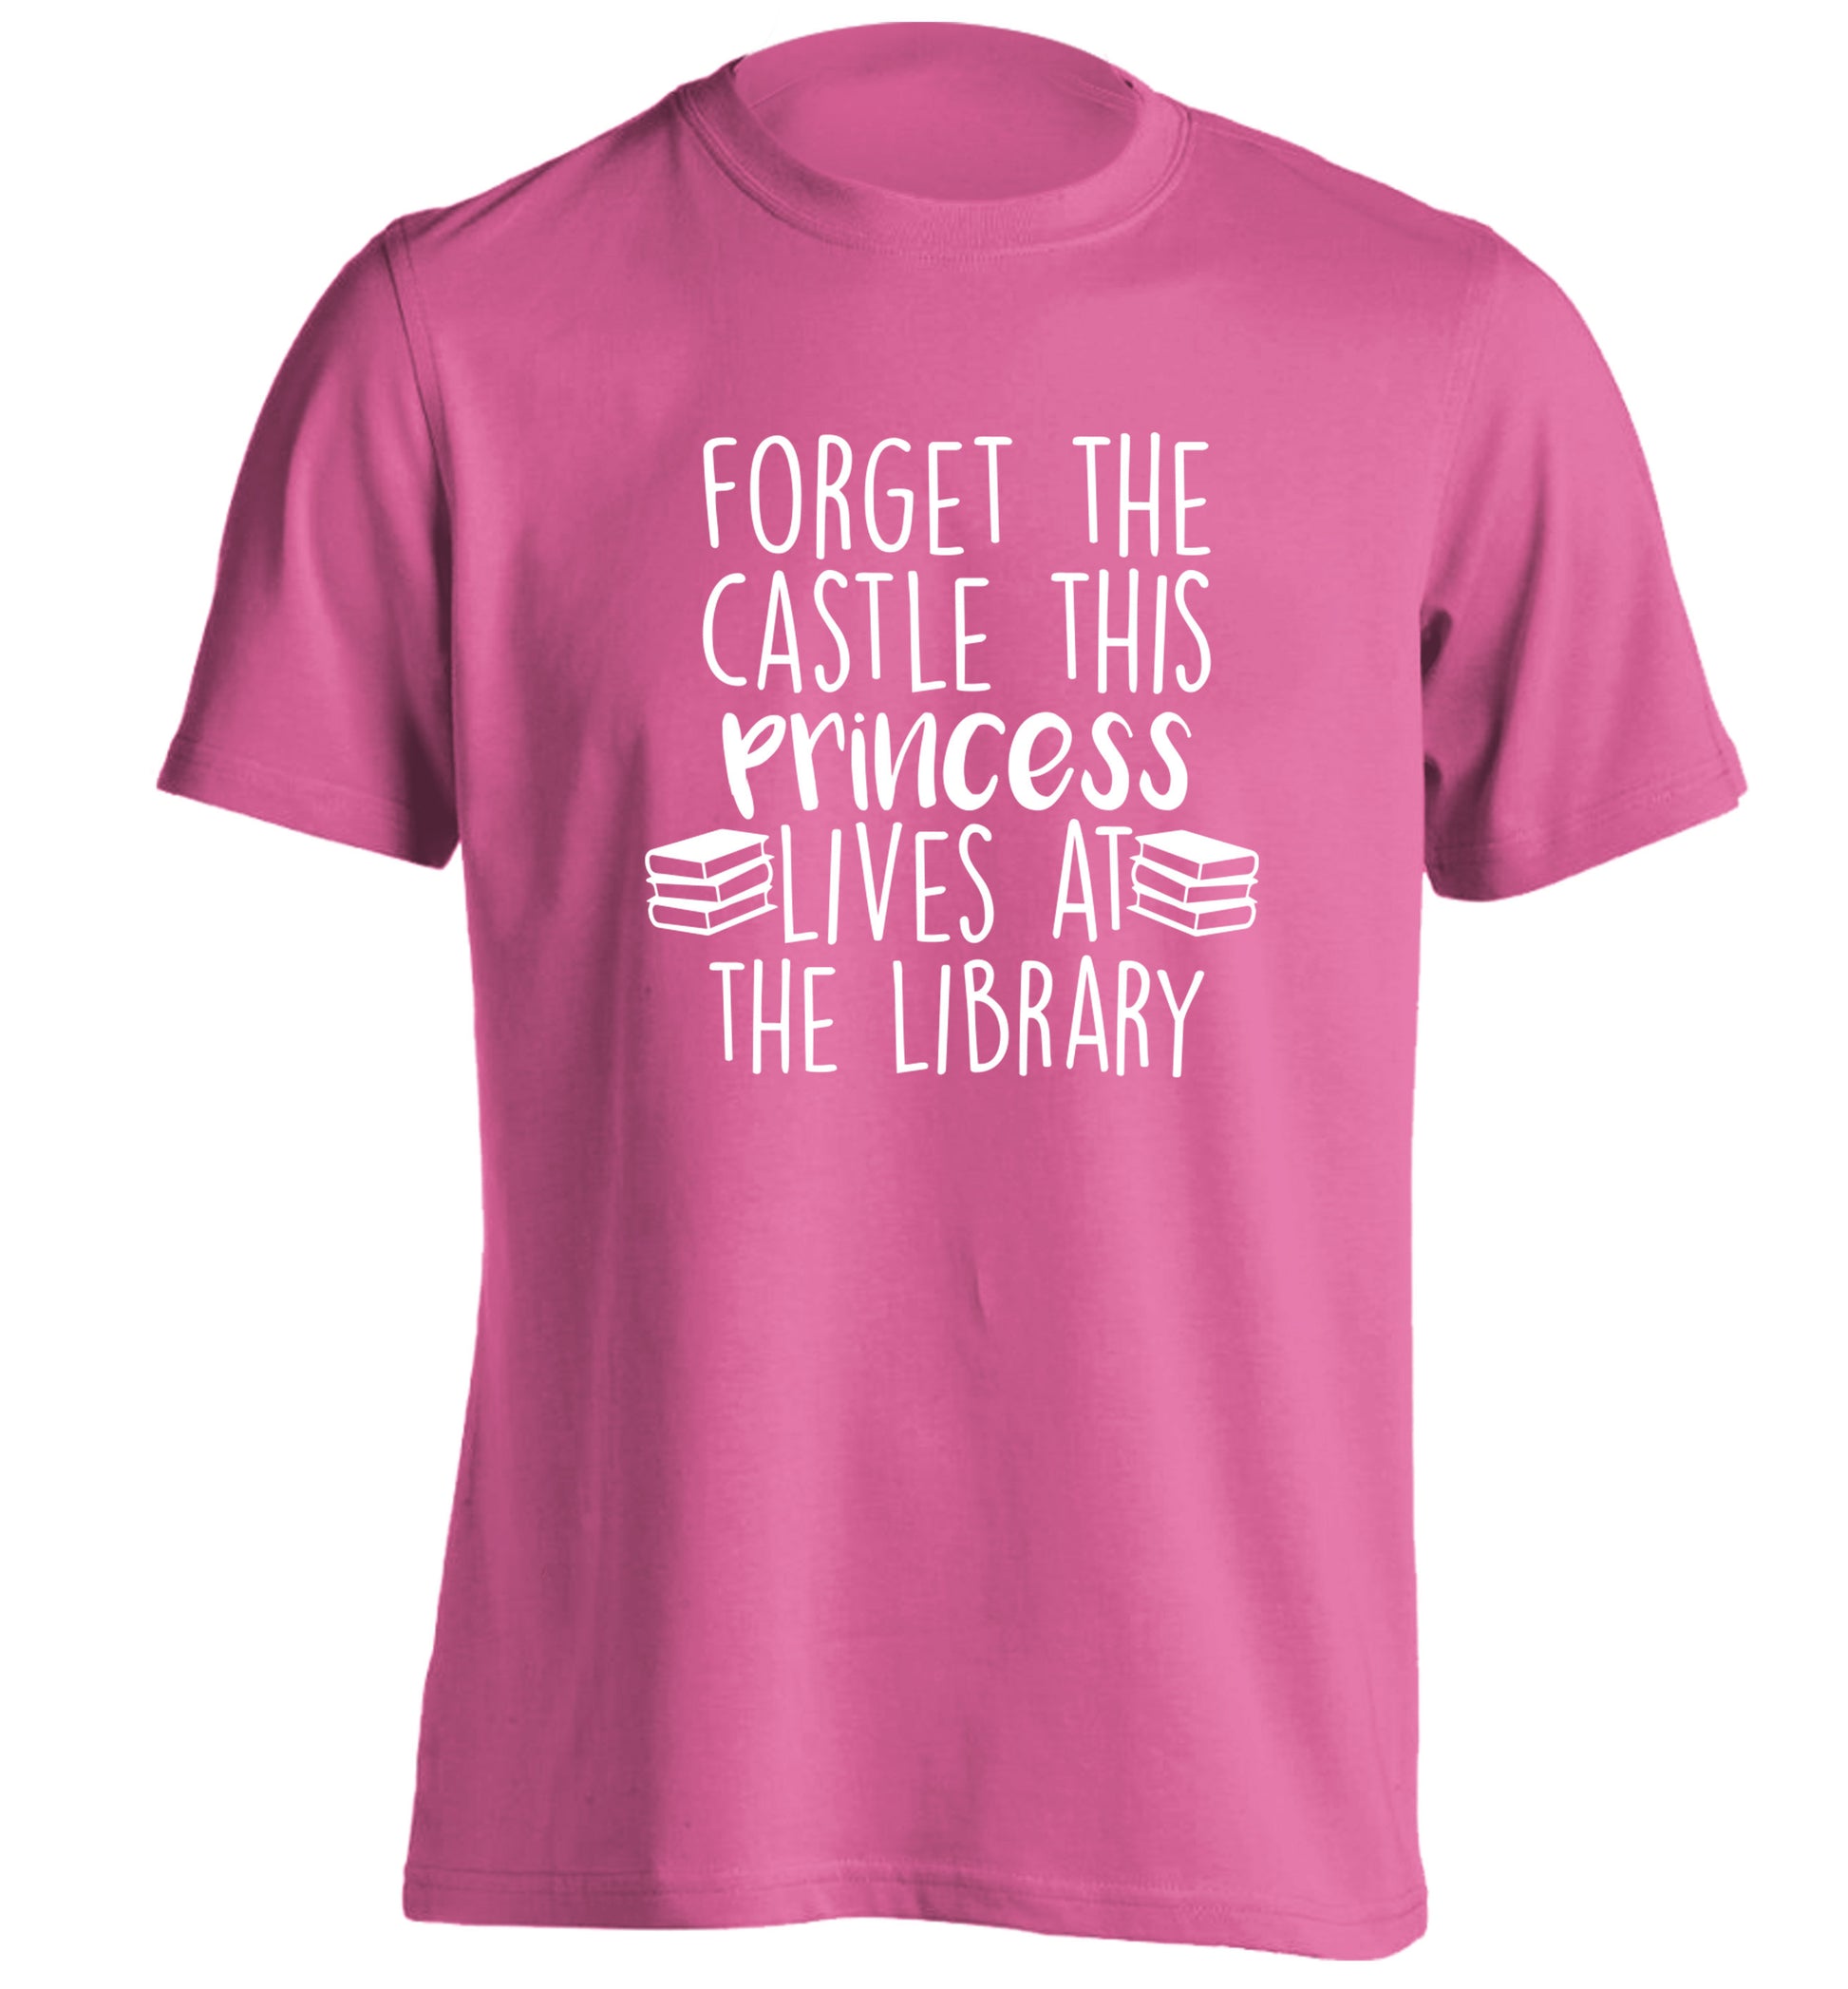 Forget the castle this princess lives at the library adults unisex pink Tshirt 2XL